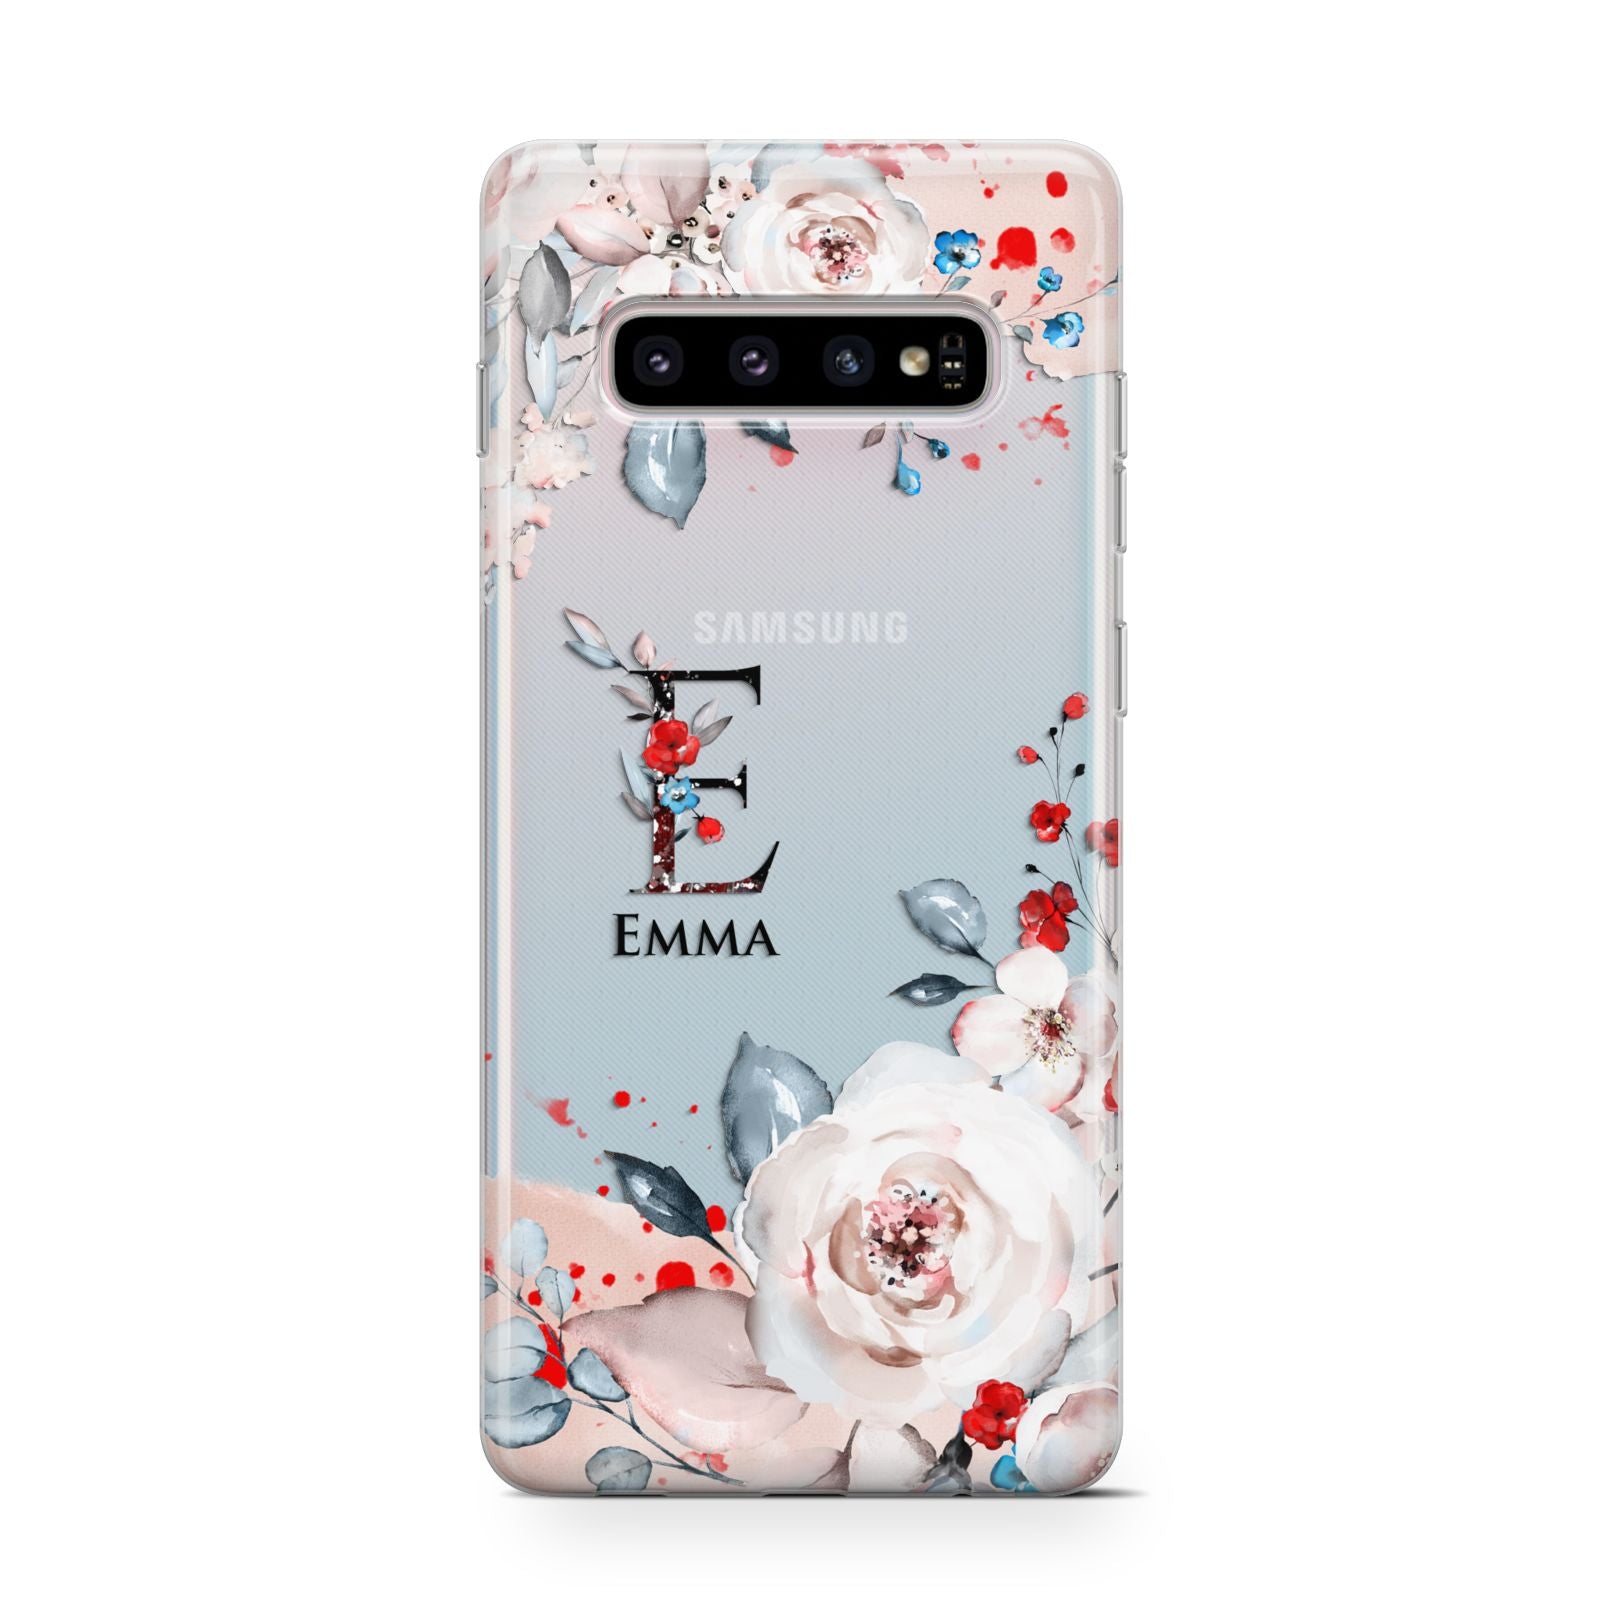 Monogrammed Roses Floral Wreath Samsung Galaxy S10 Case